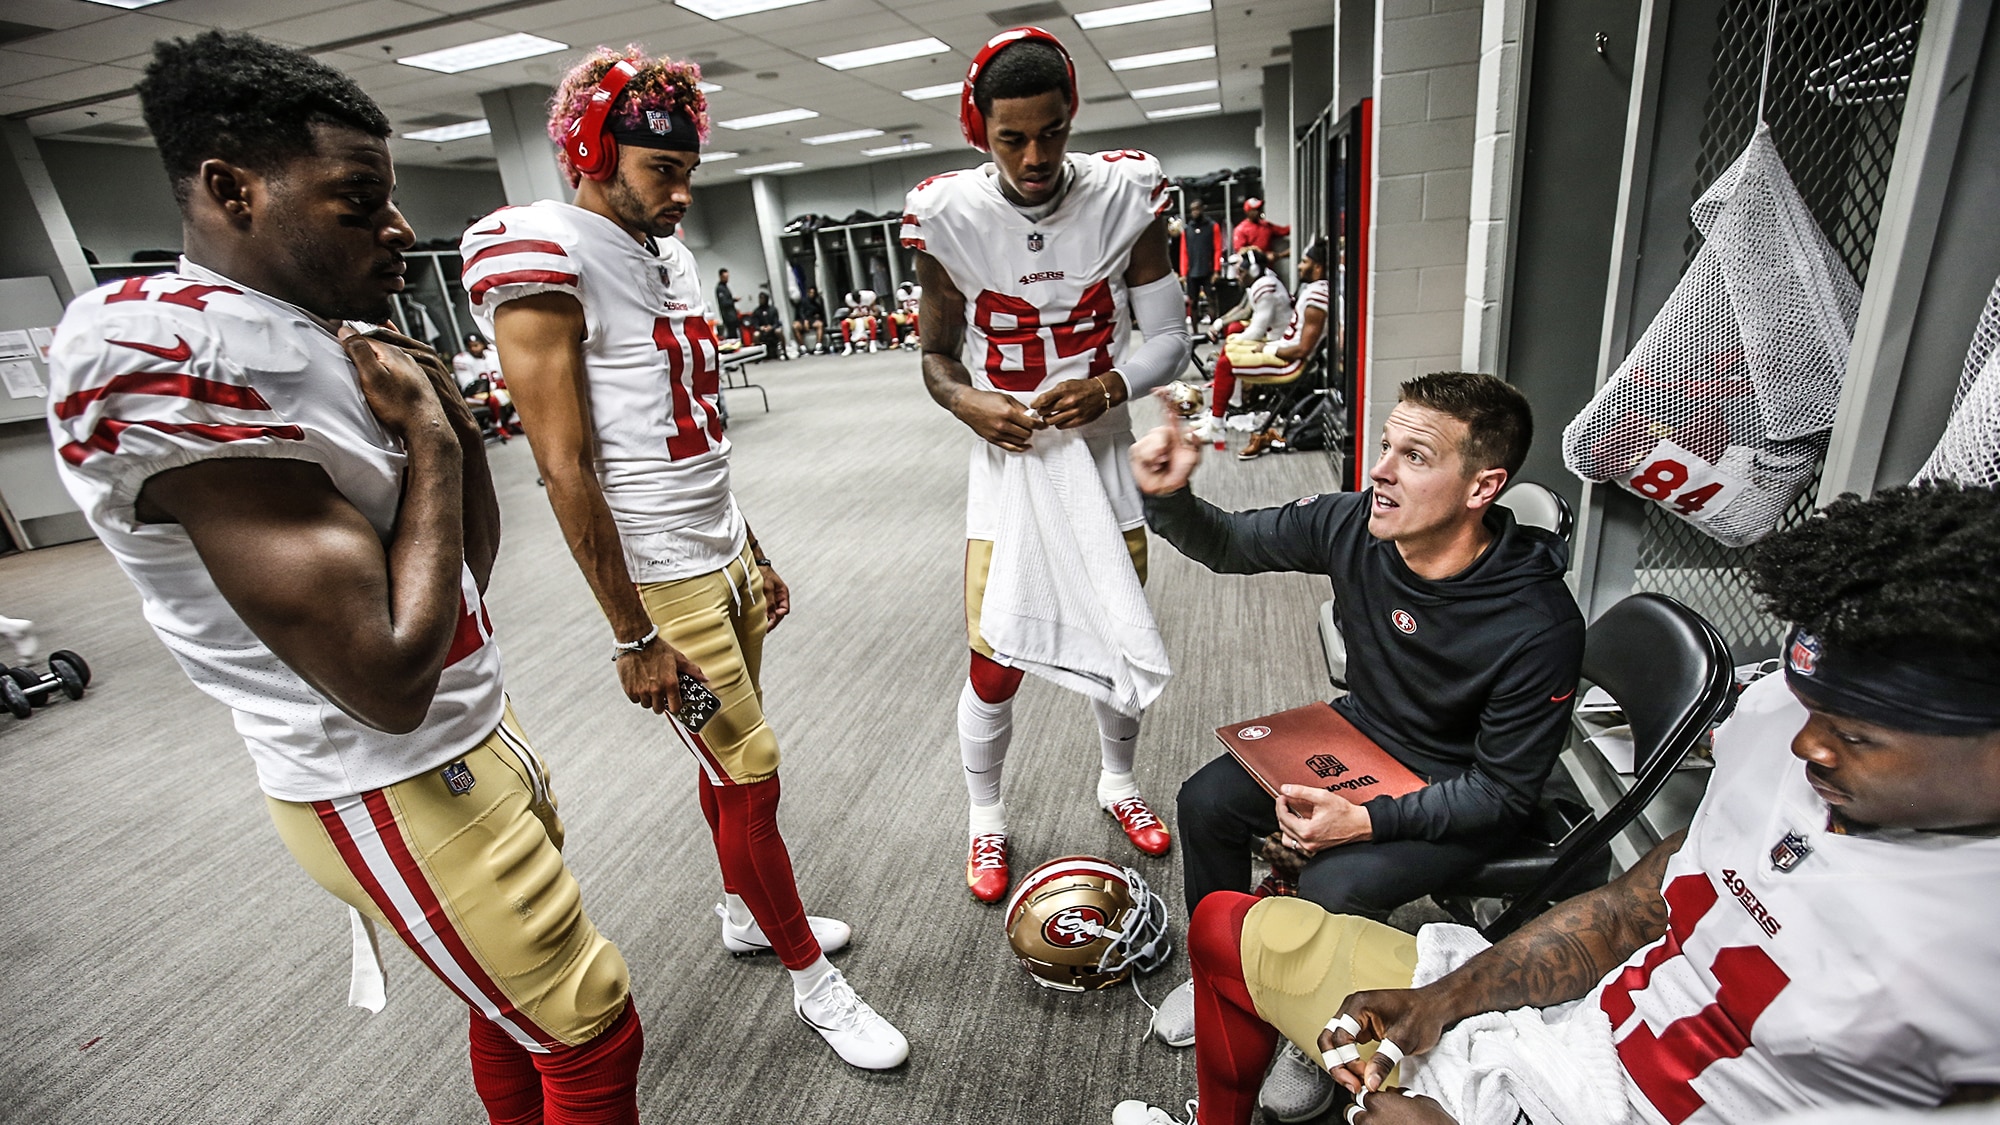 GLENDALE, AZ - OCTOBER 28: Wide Receivers/Passing Game Specialist Mike LaFleur of the San Francisco 49ers Victor Bolden Jr. #17, Dante Pettis #18, Kendrick Bourne #84 and Marquise Goodwin #11 in the locker room prior to the game against the Arizona Cardinals at State Farm Stadium on October 28, 2018 in Glendale, Arizona. The Cardinals defeated the 49ers 18-15.